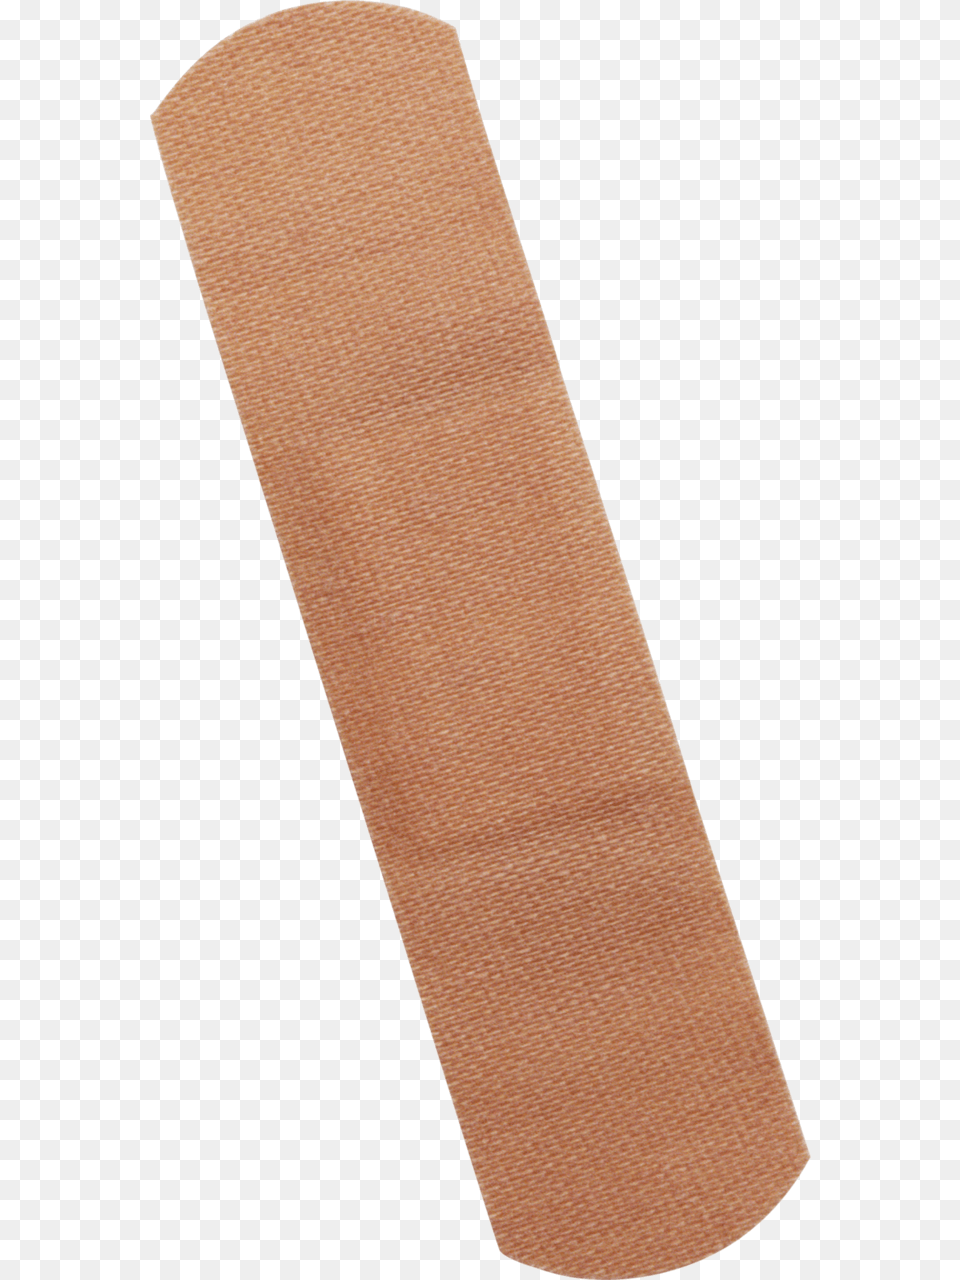 Bandage, First Aid Png